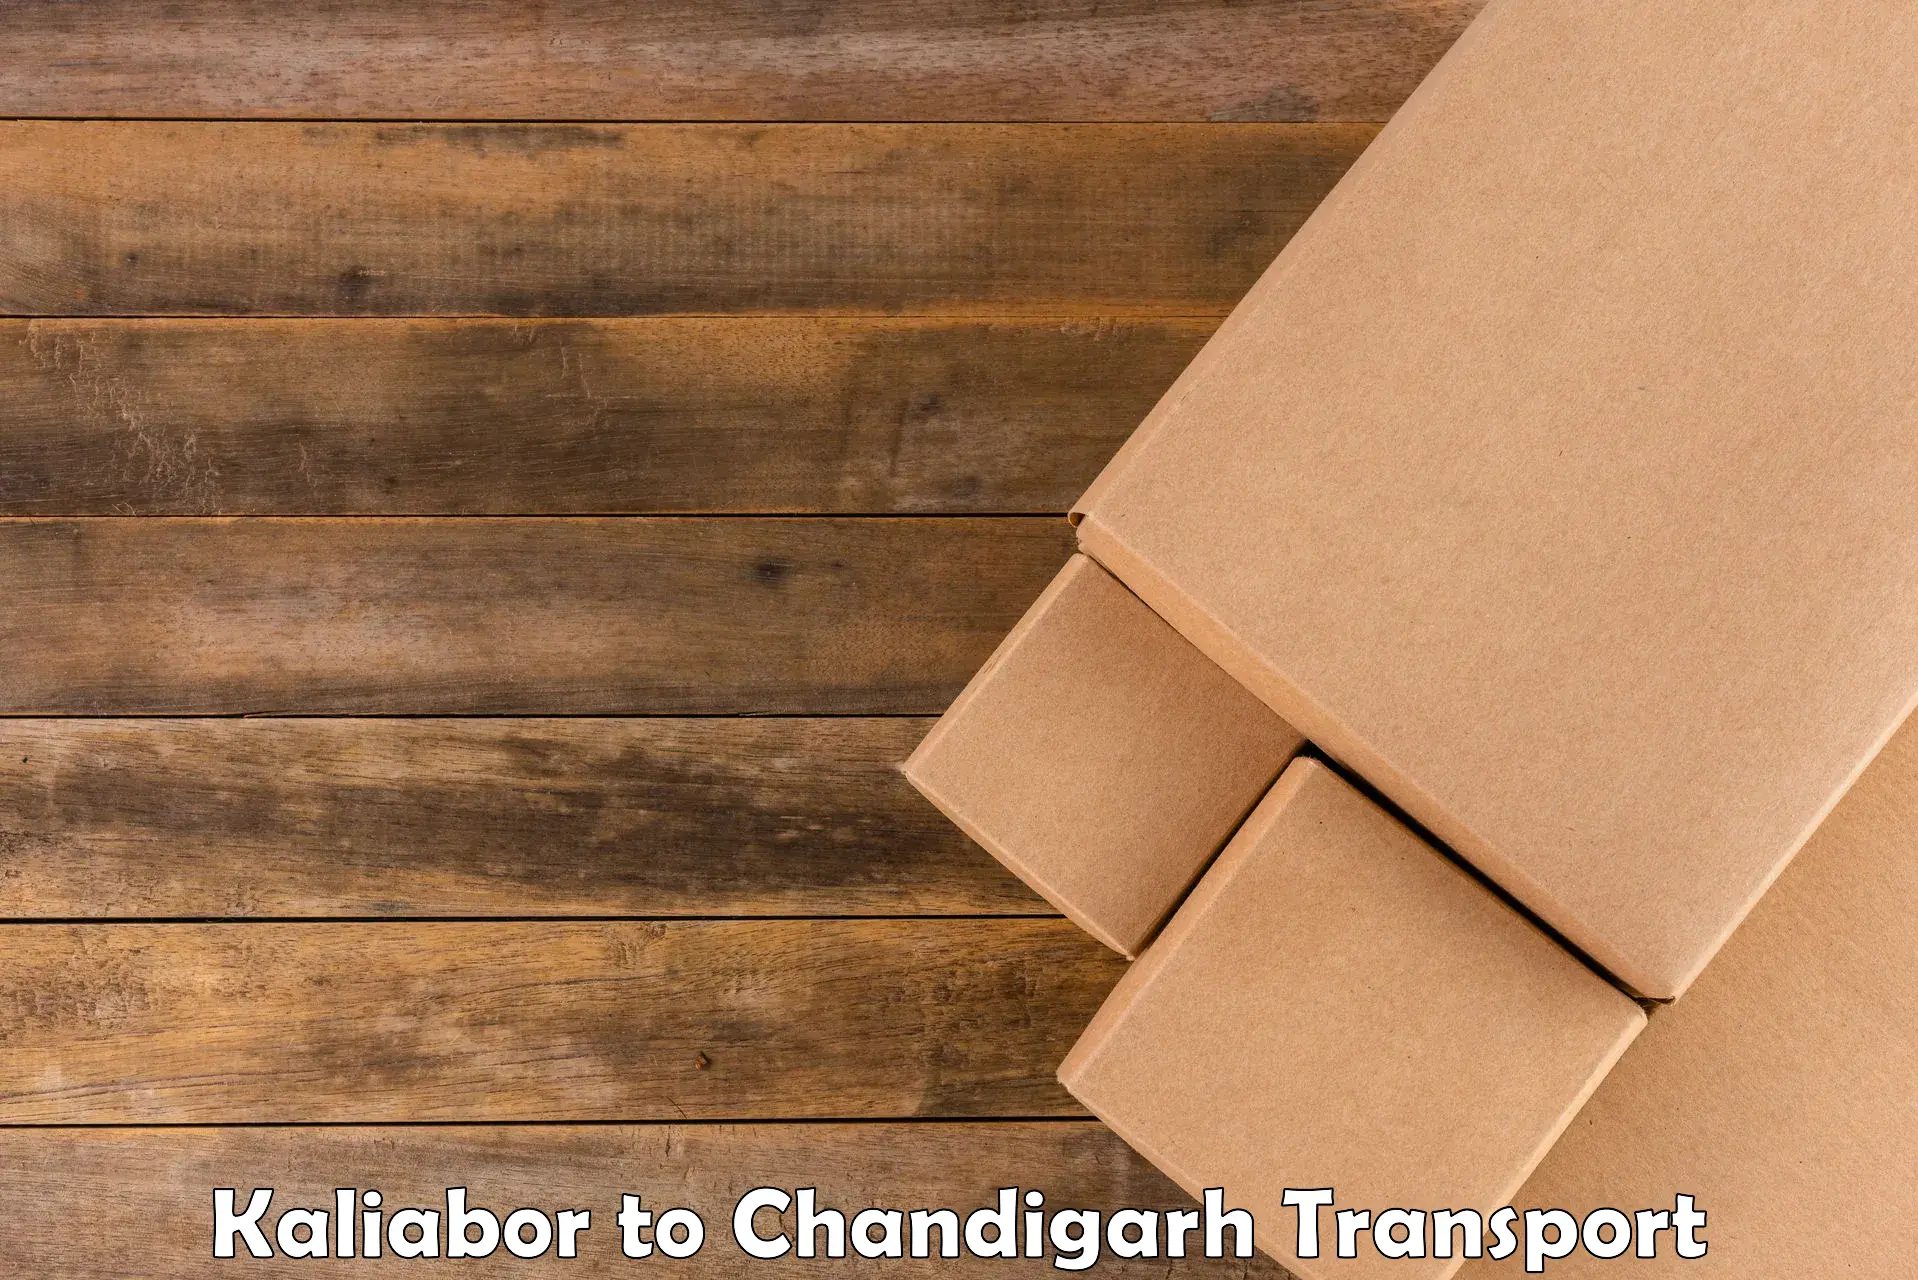 Vehicle transport services Kaliabor to Chandigarh